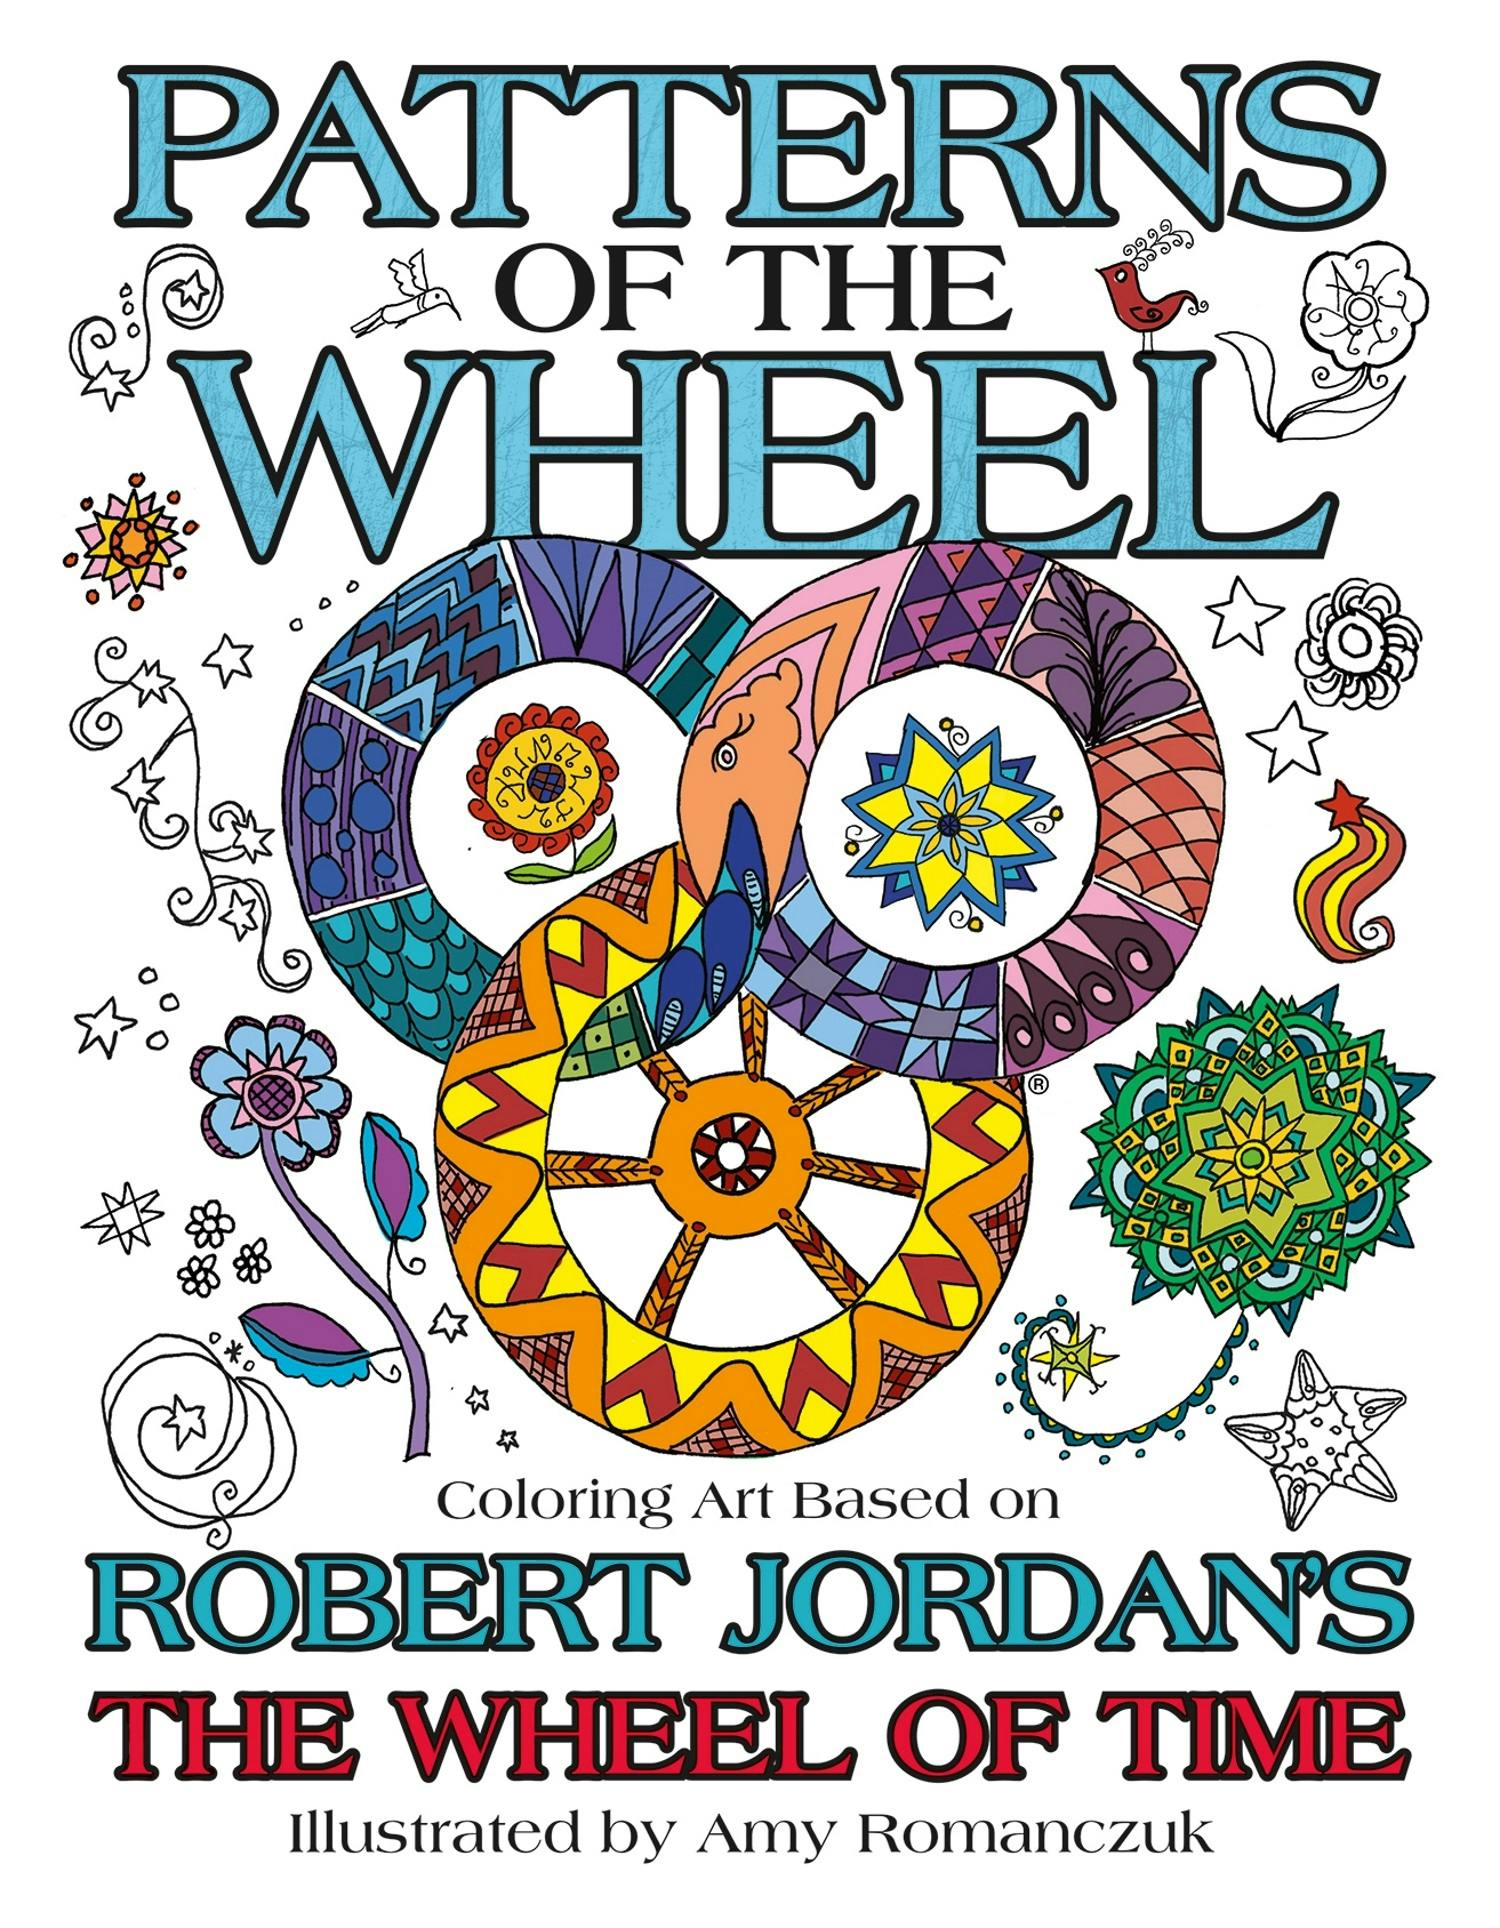 Cover for the book titled as: Patterns of the Wheel